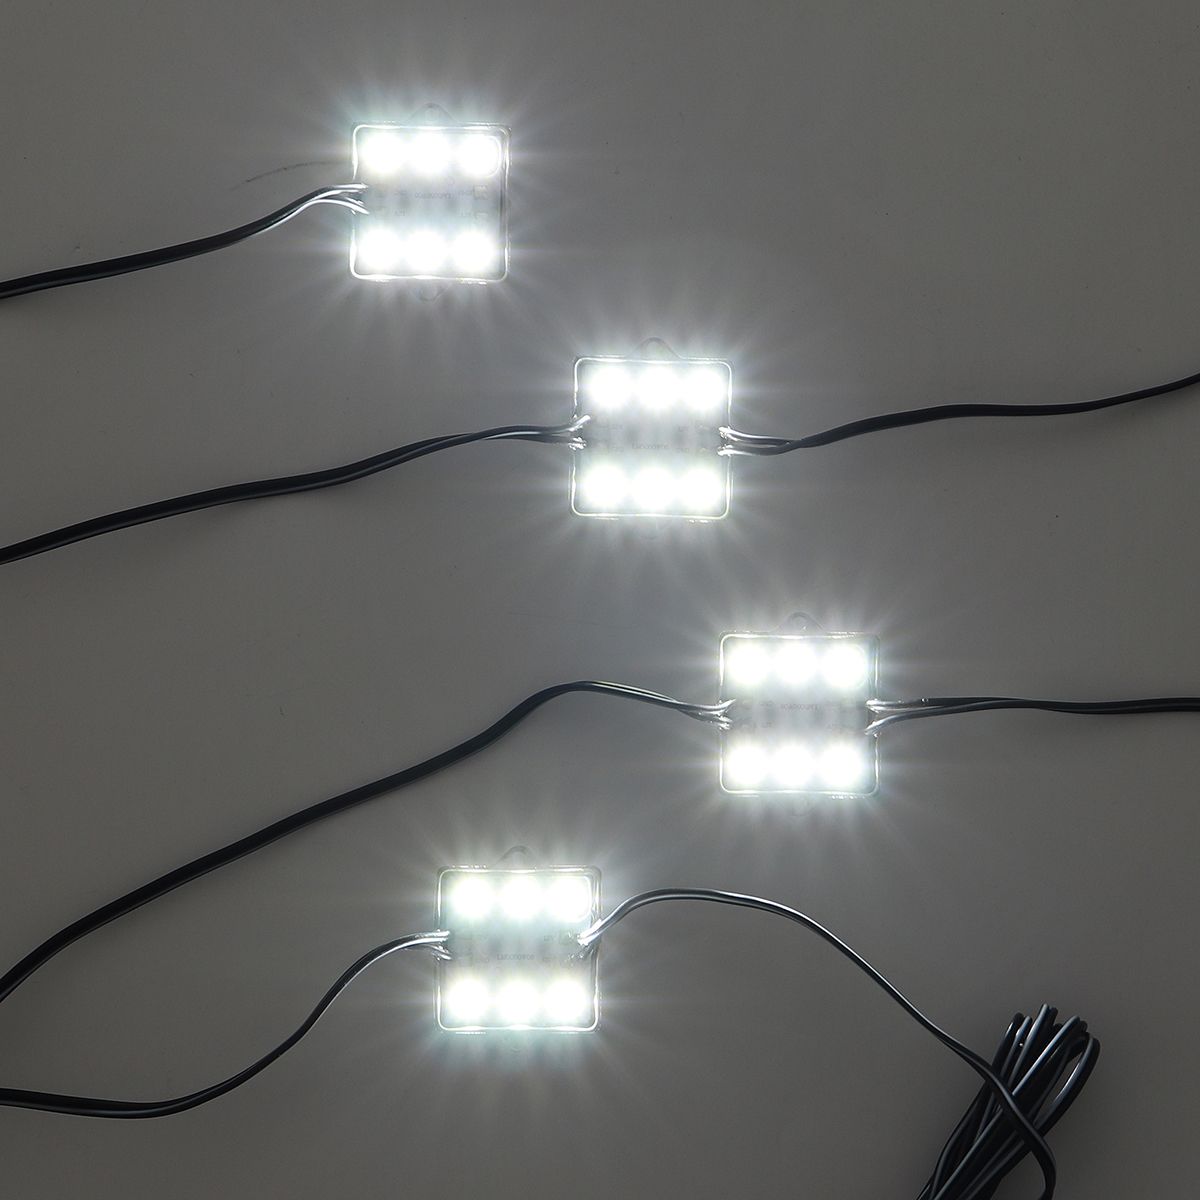 8Pcs-60cm-LED-Truck-Bed-Decoration-Dome-Light-DC-12V-White-Waterproof-IP65-for-Work-Box-Truck-1688778